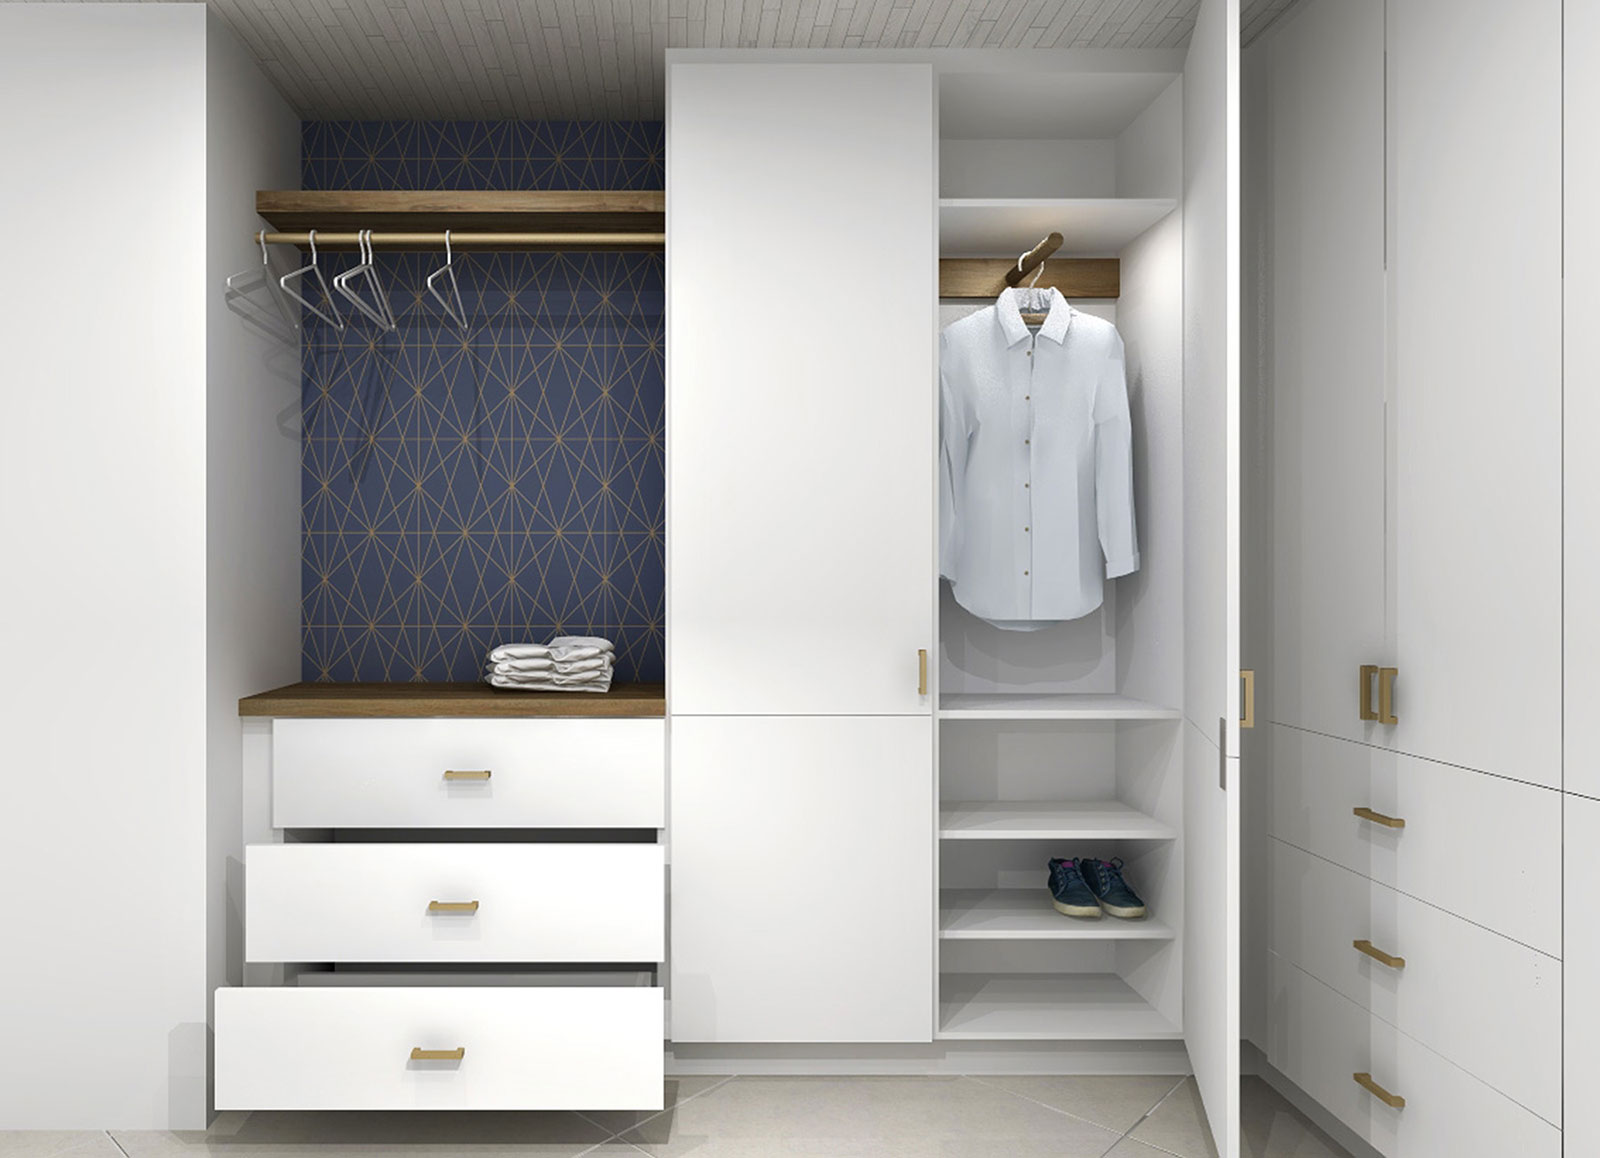 IKEA Walk-In Closets: With or Without Doors?